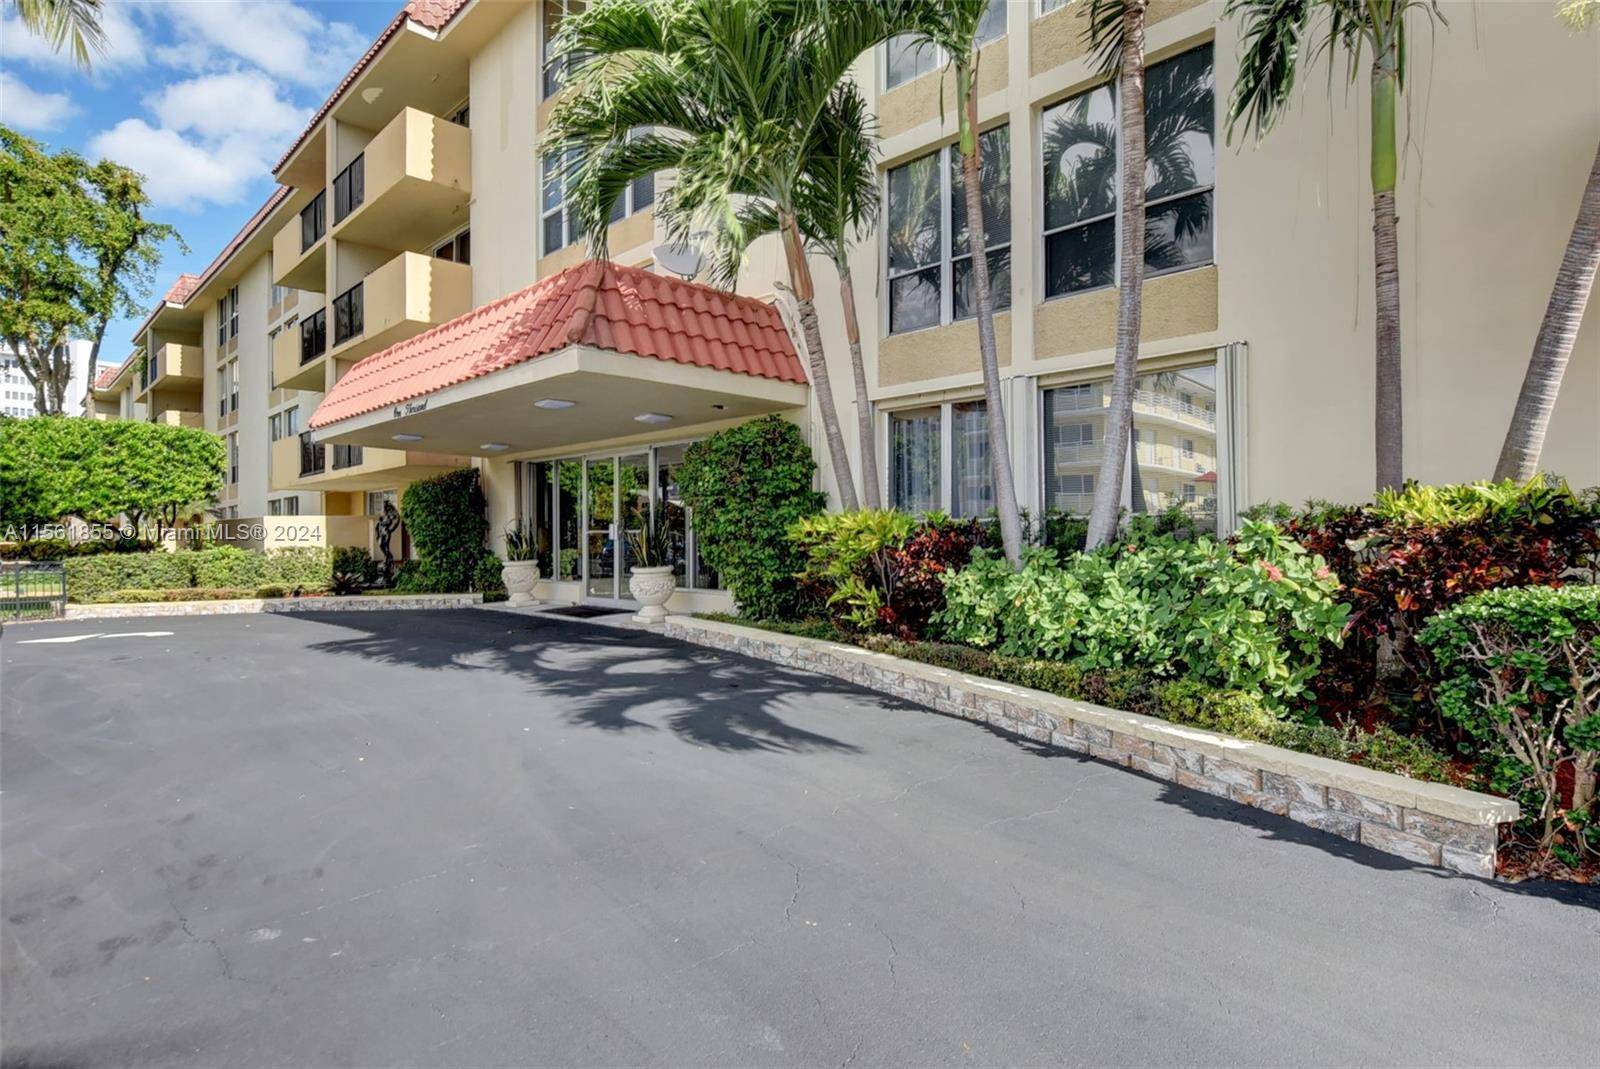 Prime location. Rarely available 2BD 2BA condo located in East Boca just 3 short blocks to the Beach.